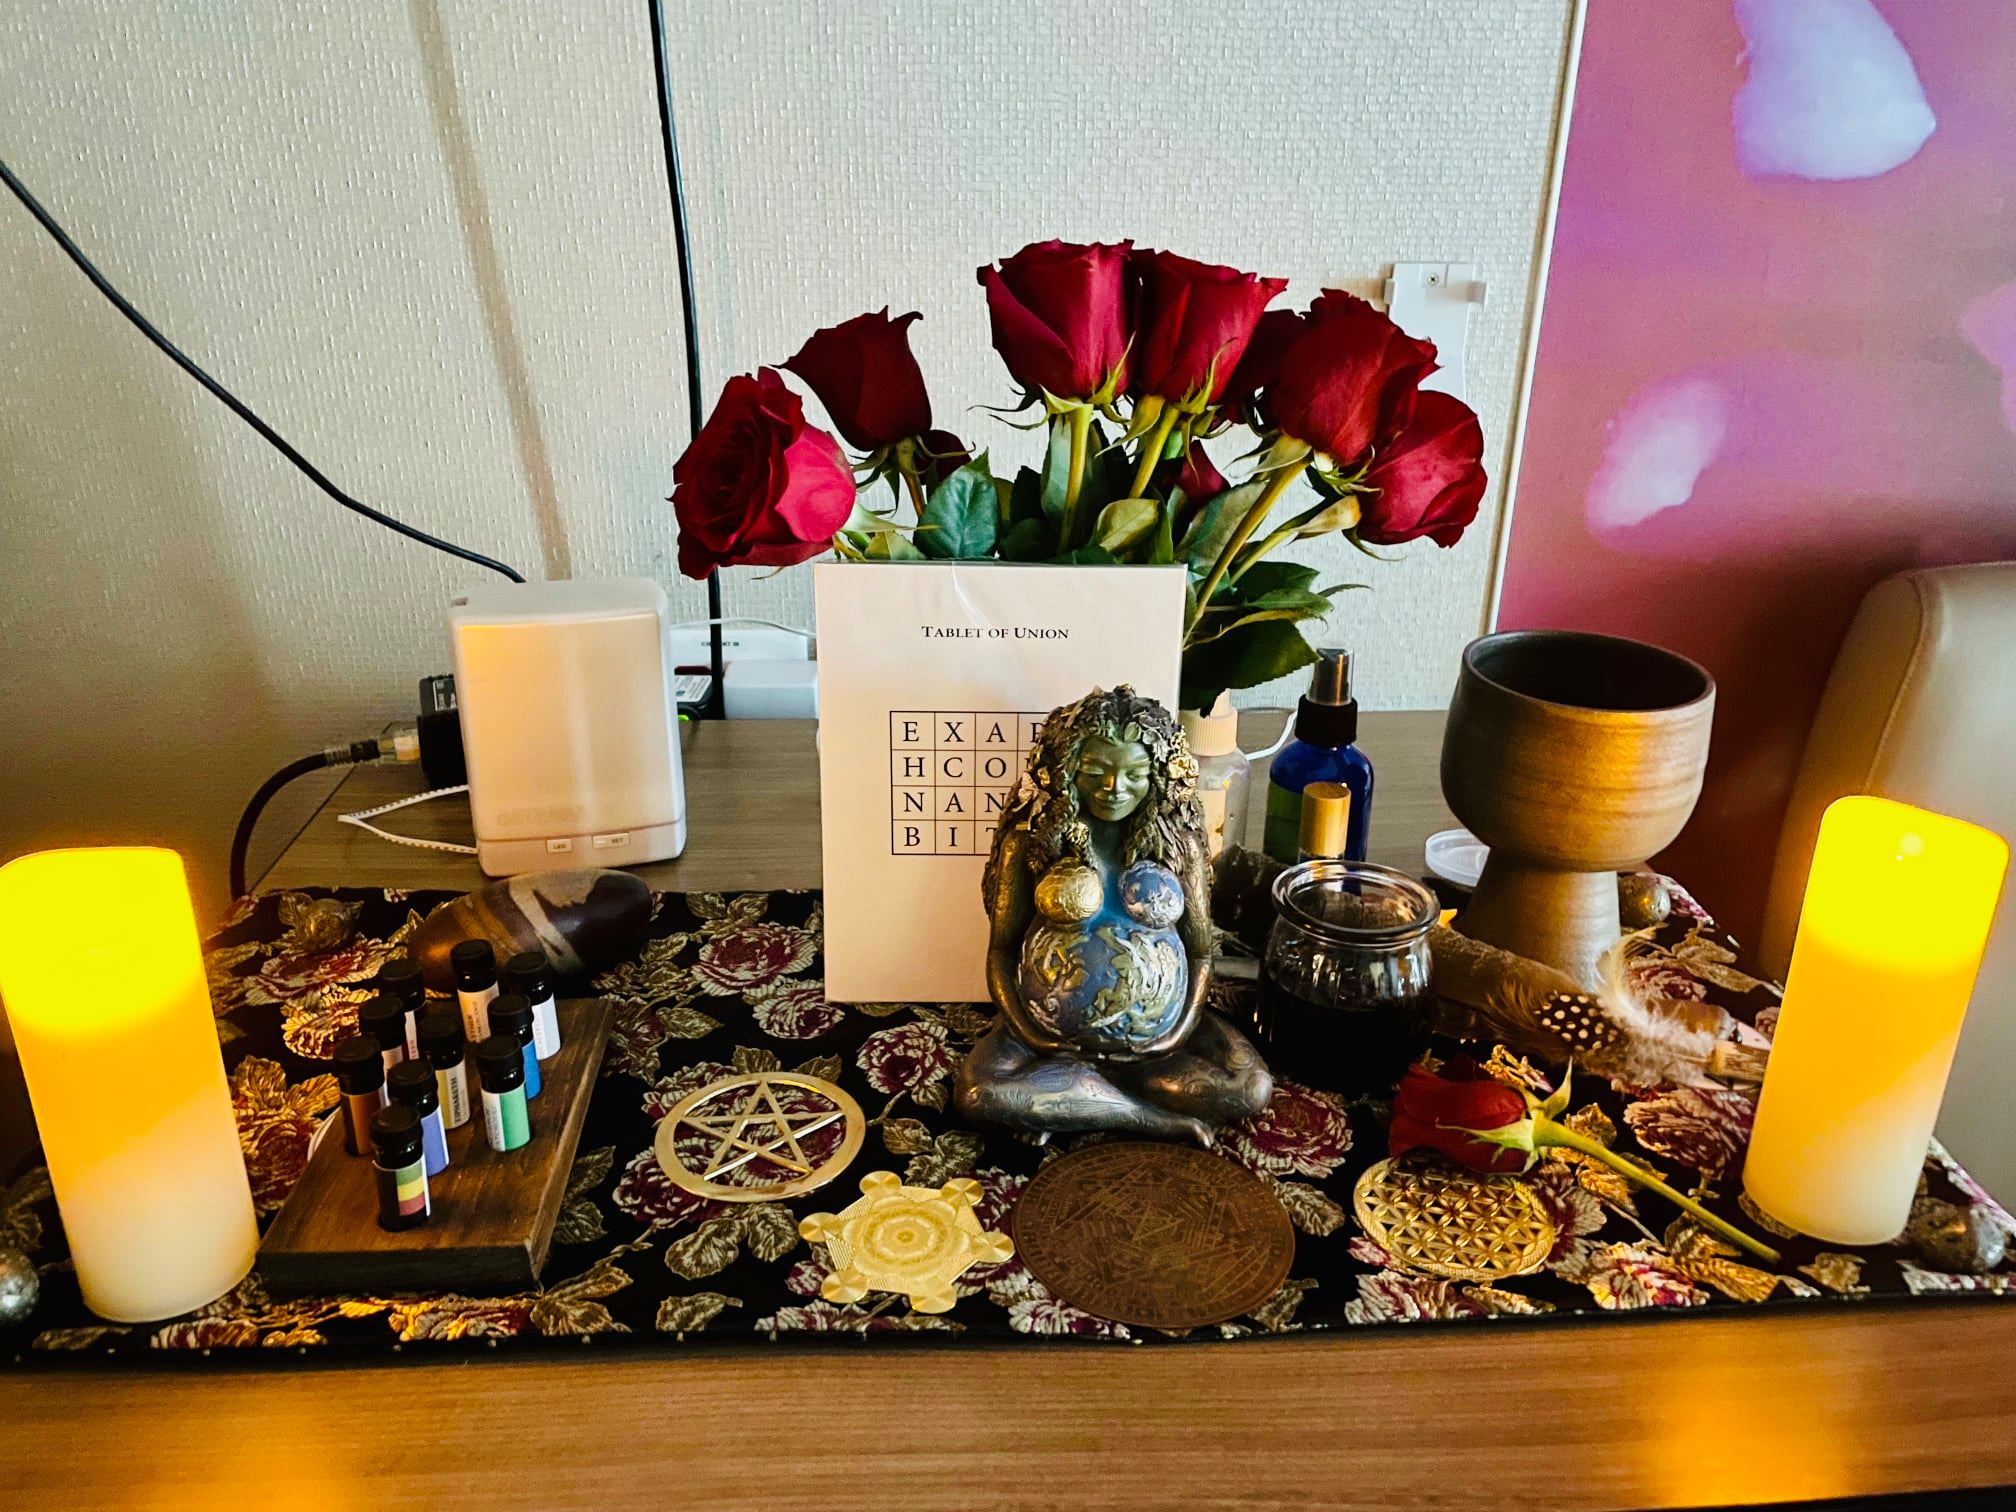 The image includes an altar created for the birth and blessing of baby Margo. The altar contains roses, a statue of Mother Gai, and offerings for each of the directions and elements of the earth.